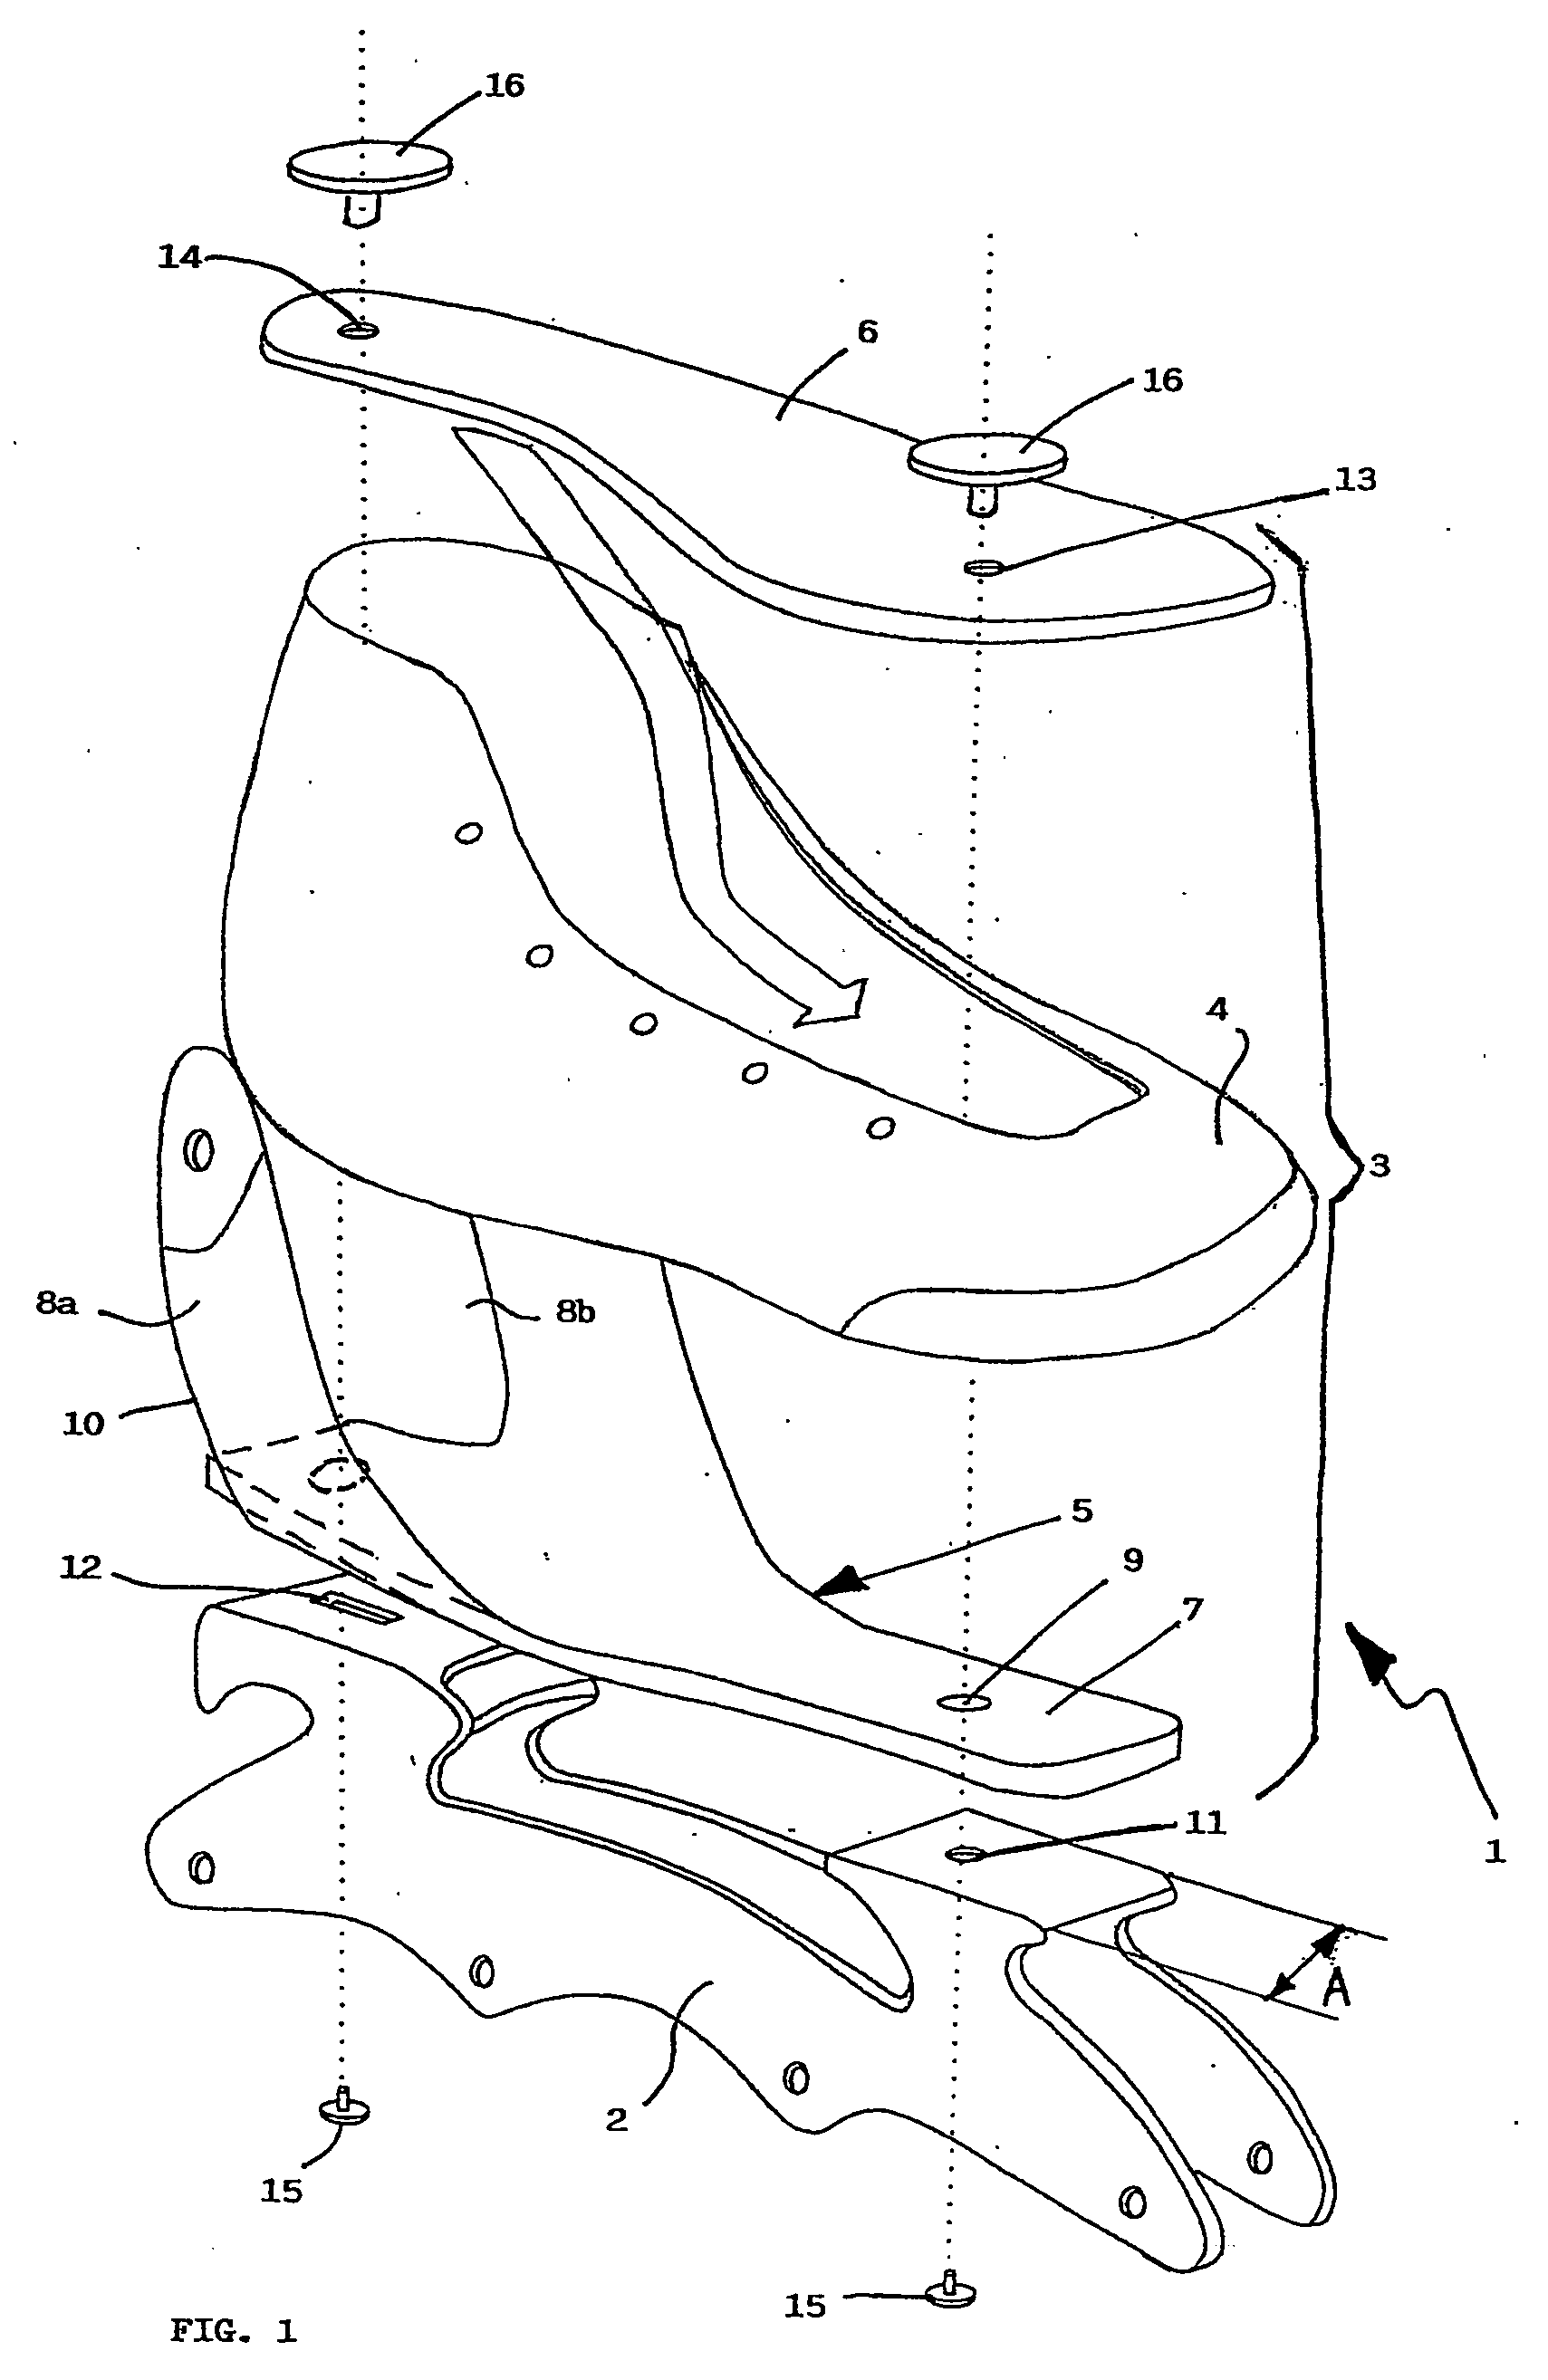 Structure of a sports footwear for roller skates or ice skates